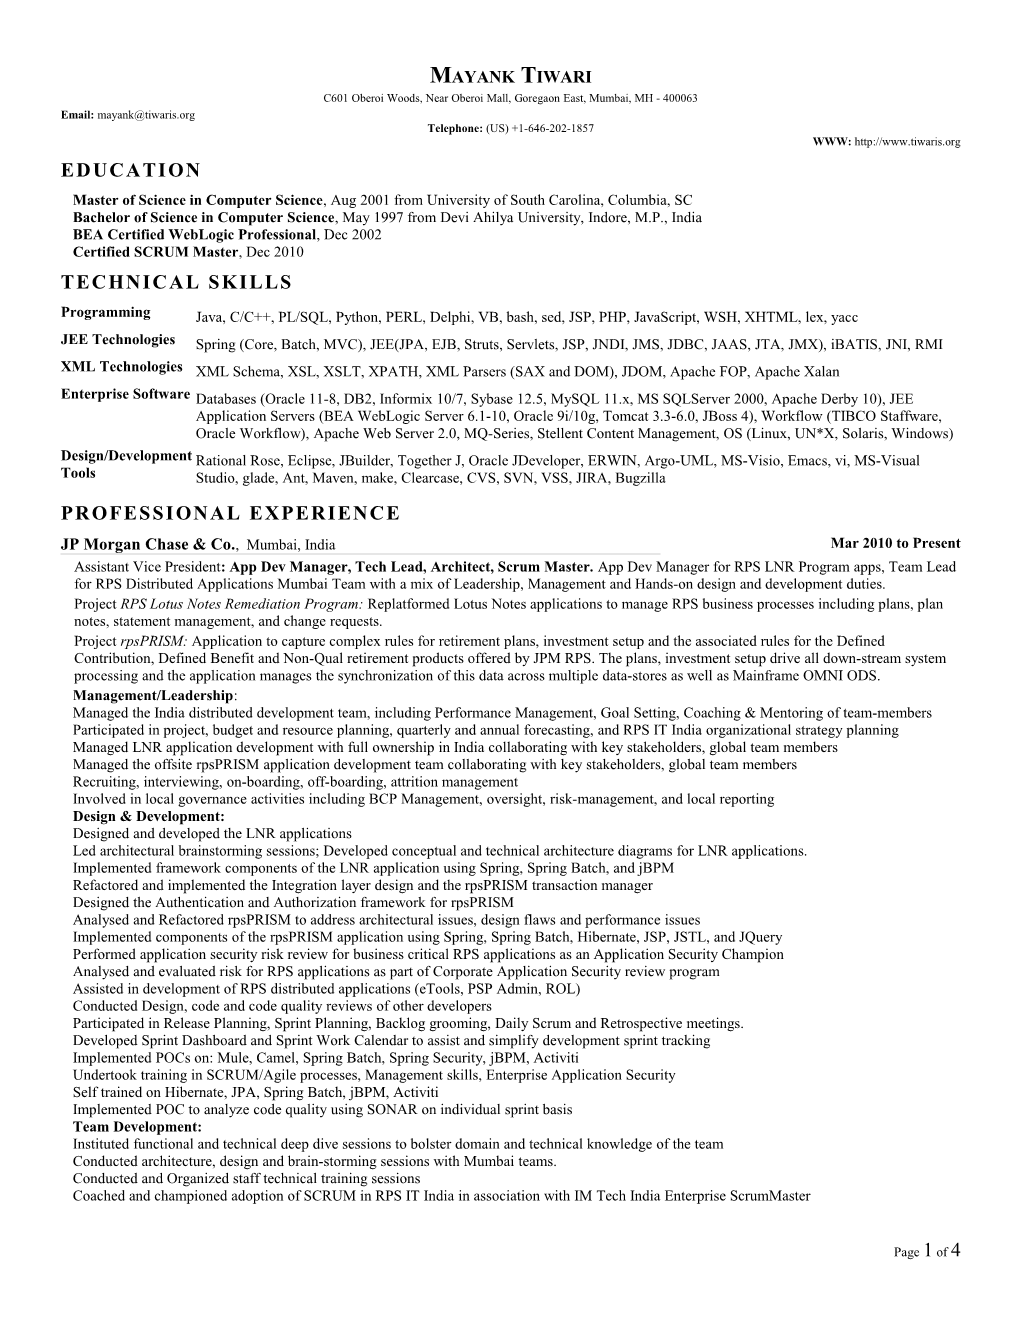 Master of Science in Computer Science , Aug 2001 from University of South Carolina, Columbia